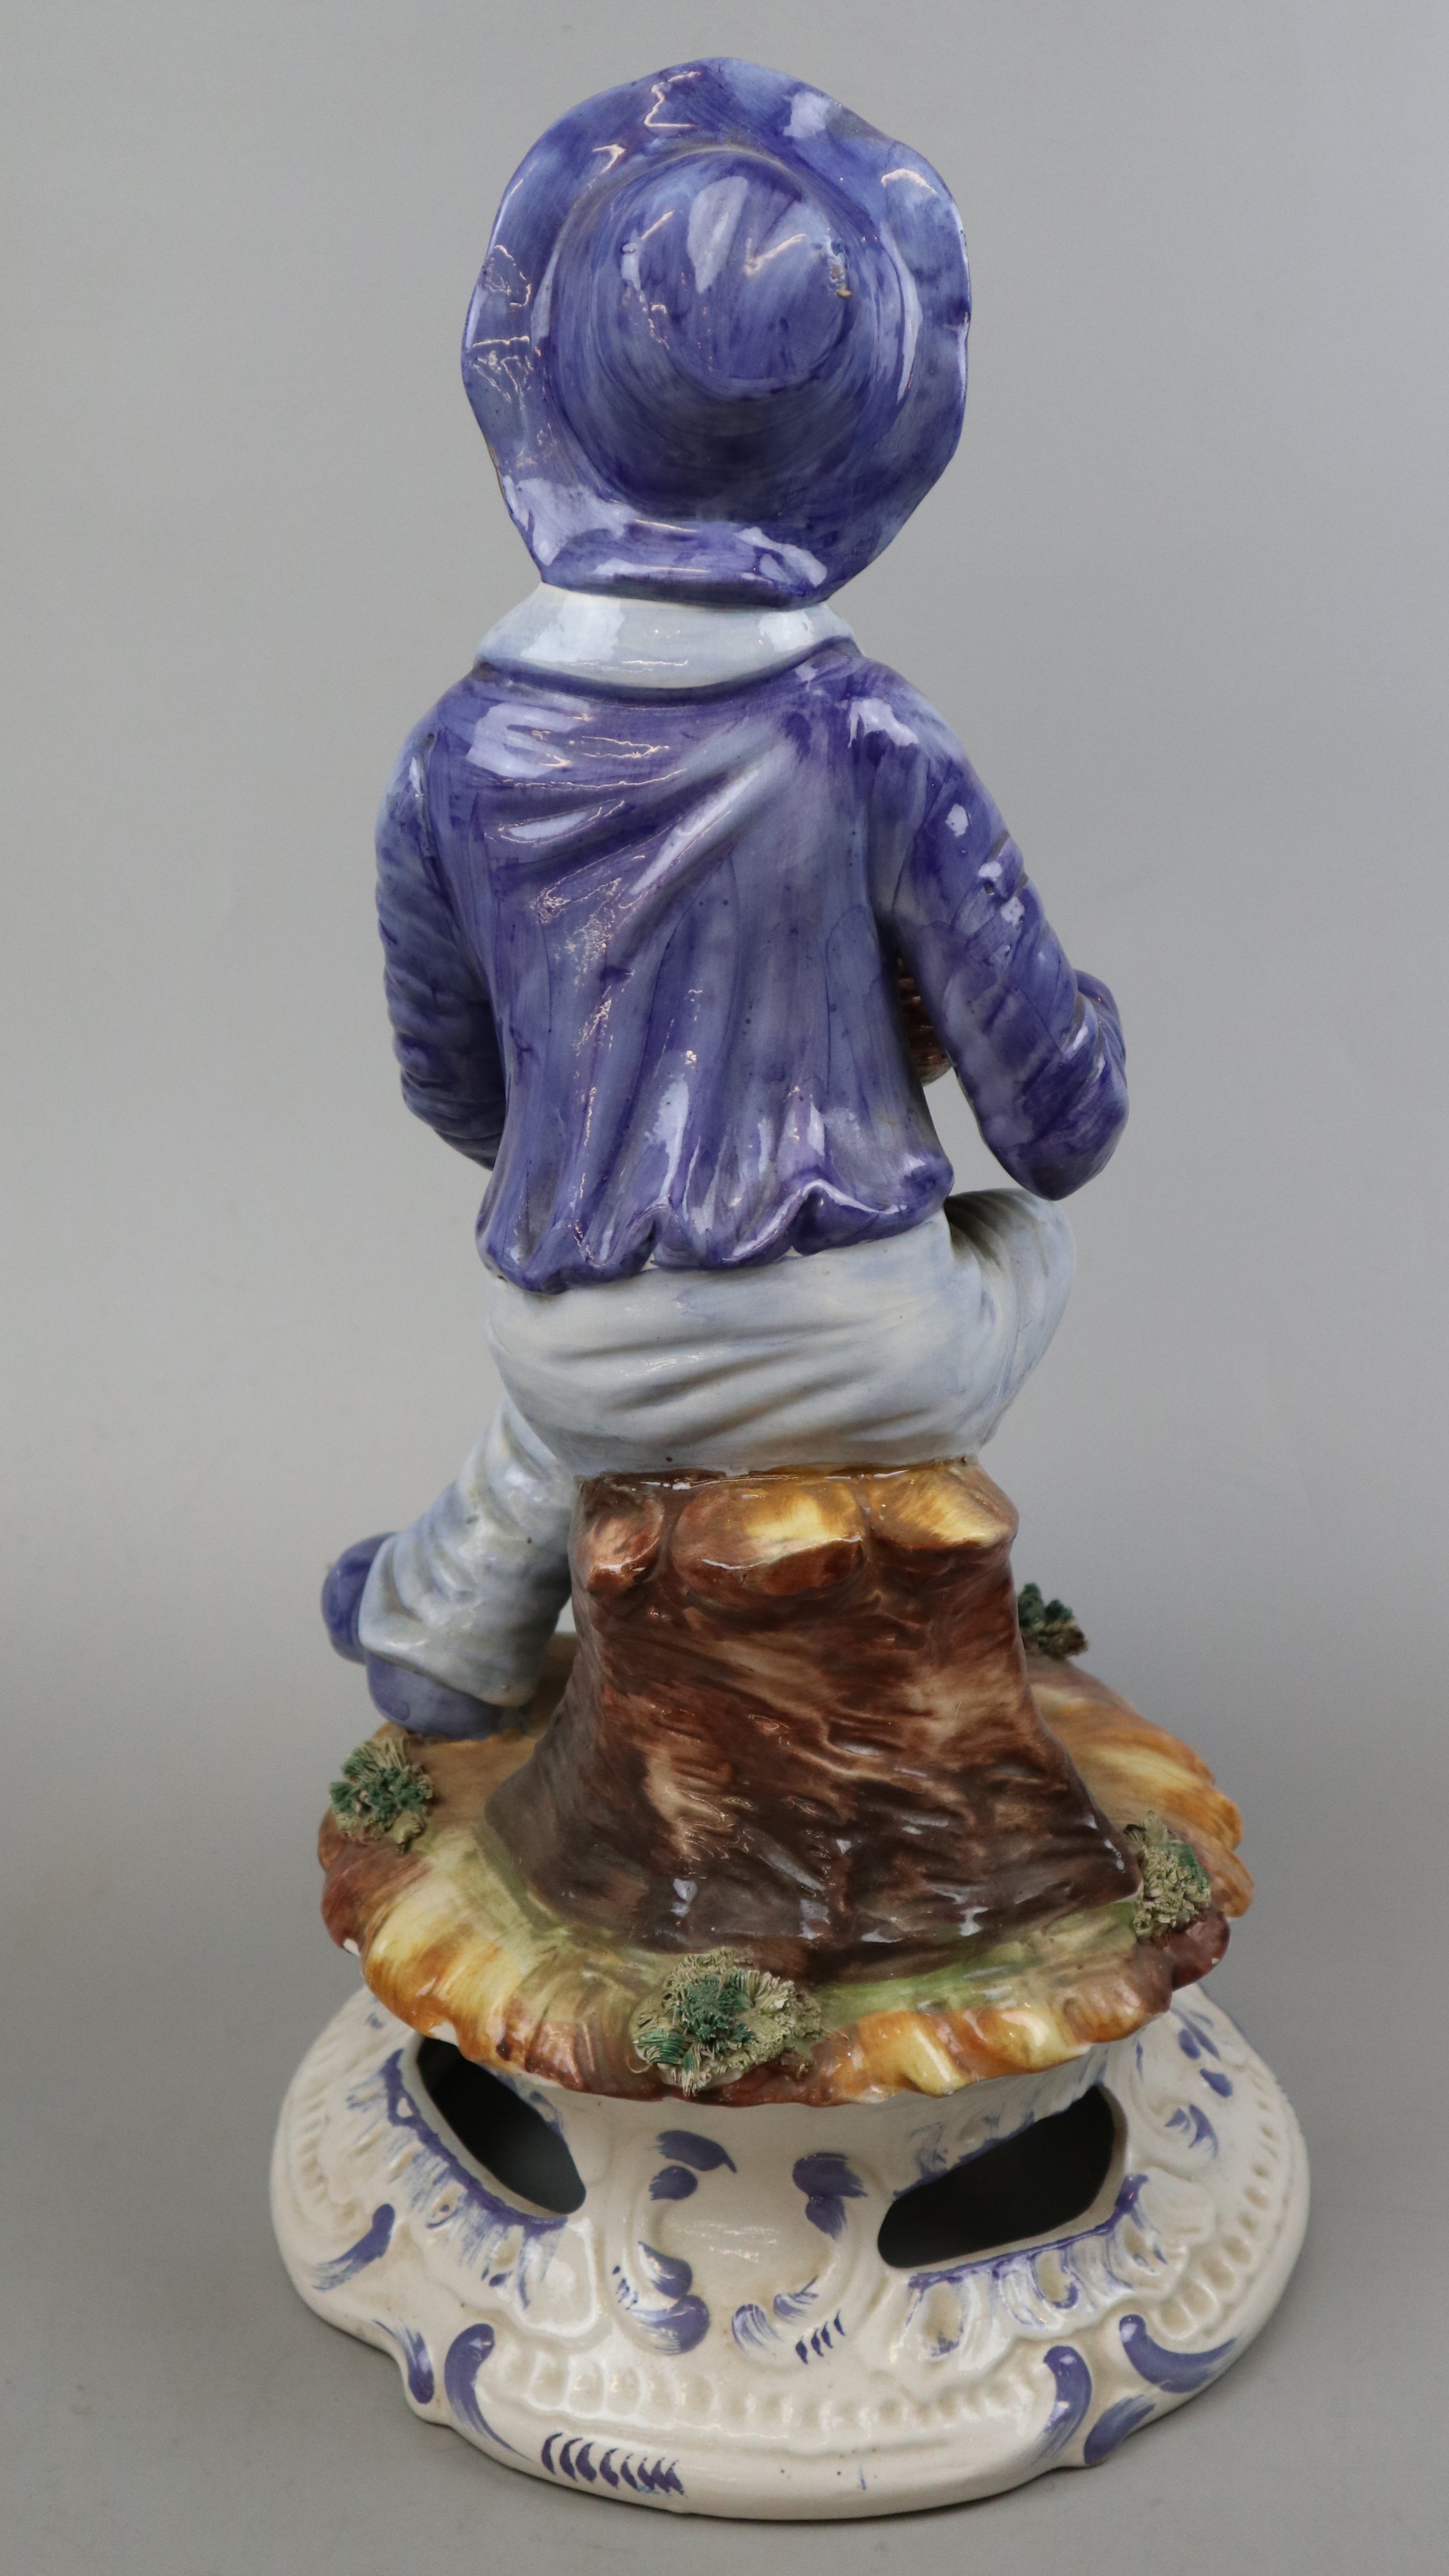 Large ceramic Capodimonte figure of a boy - Approx height: 45cm - Image 4 of 5